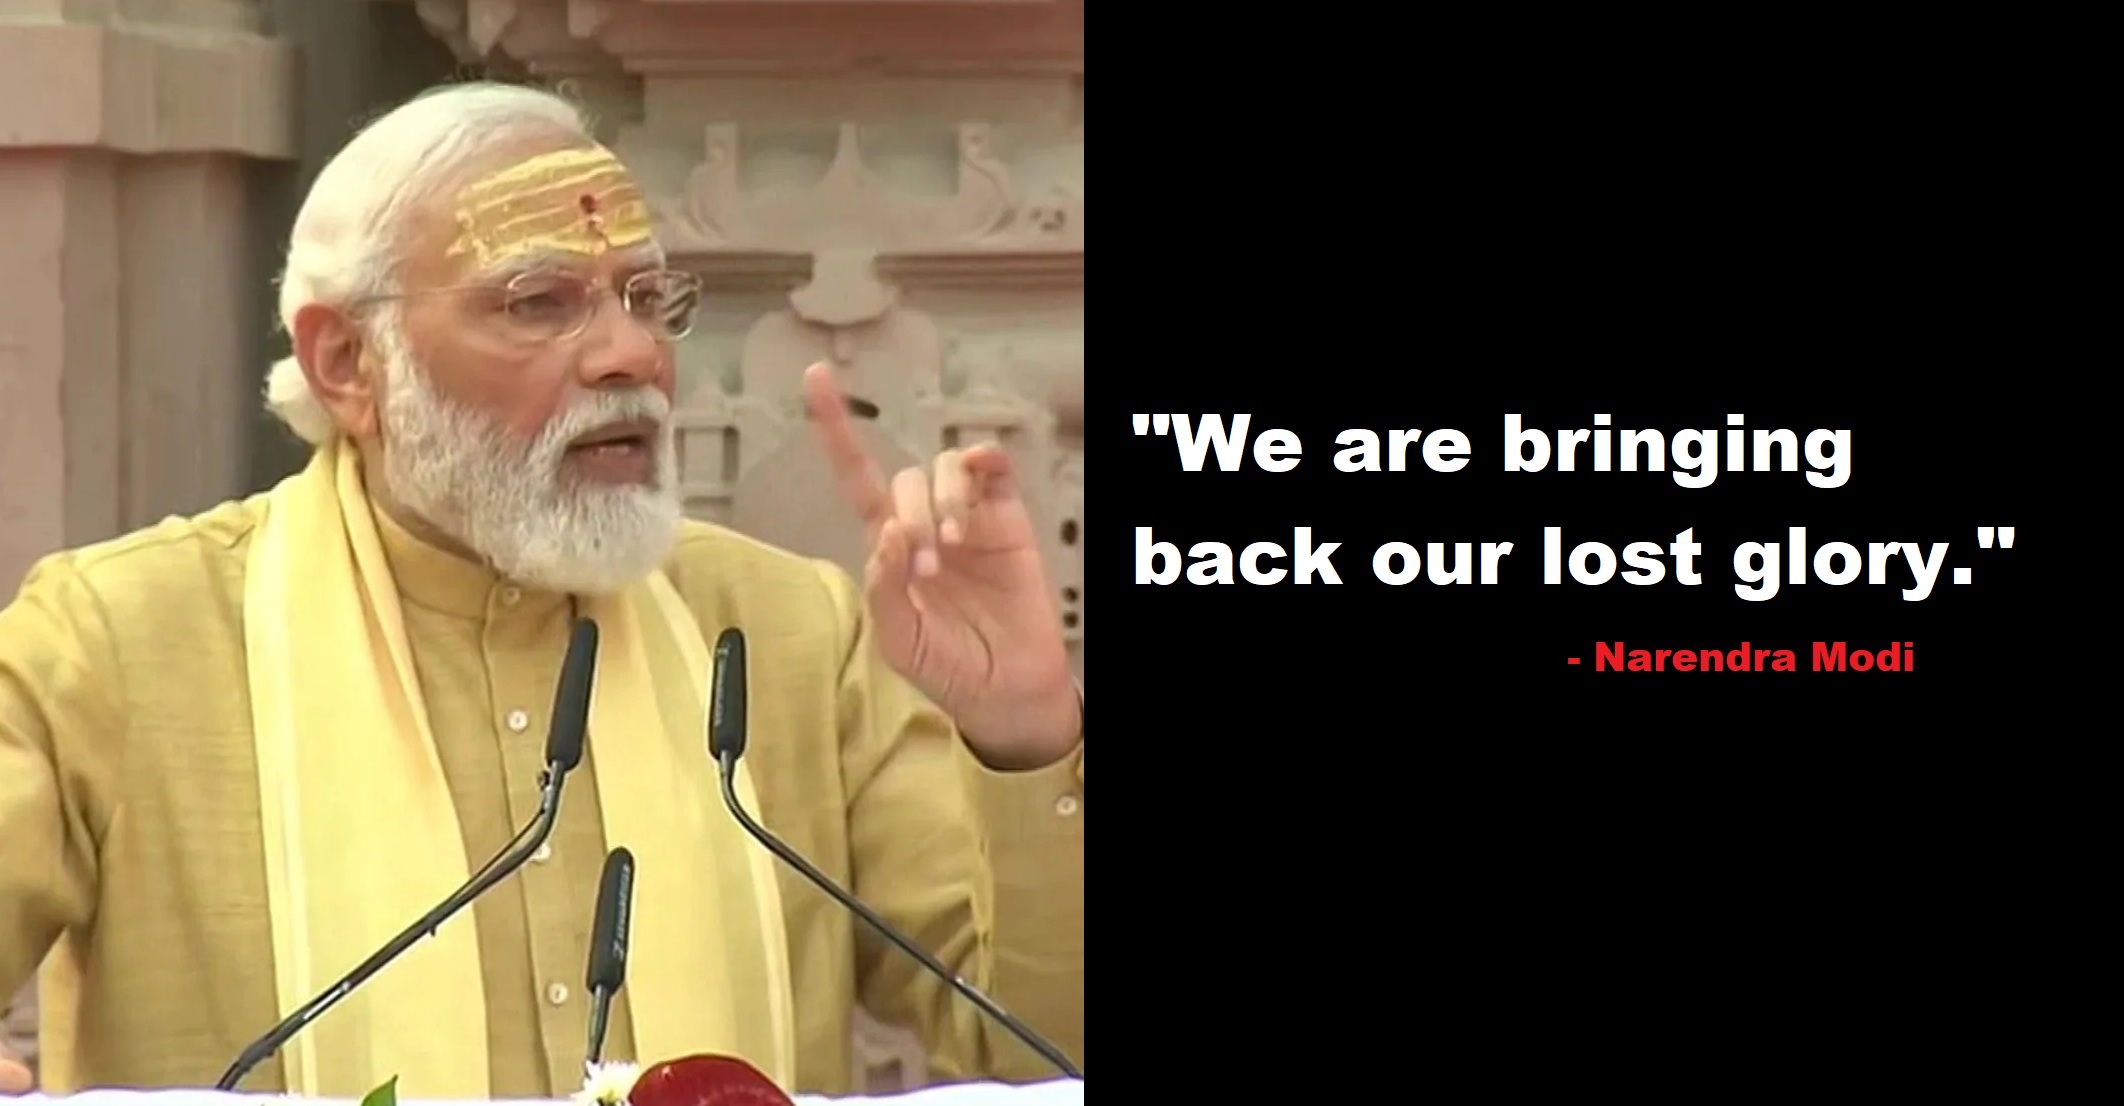 Here Are 3 ‘Sankalps’ PM Modi Requested From Indians During His Impactful Speech In Kashi